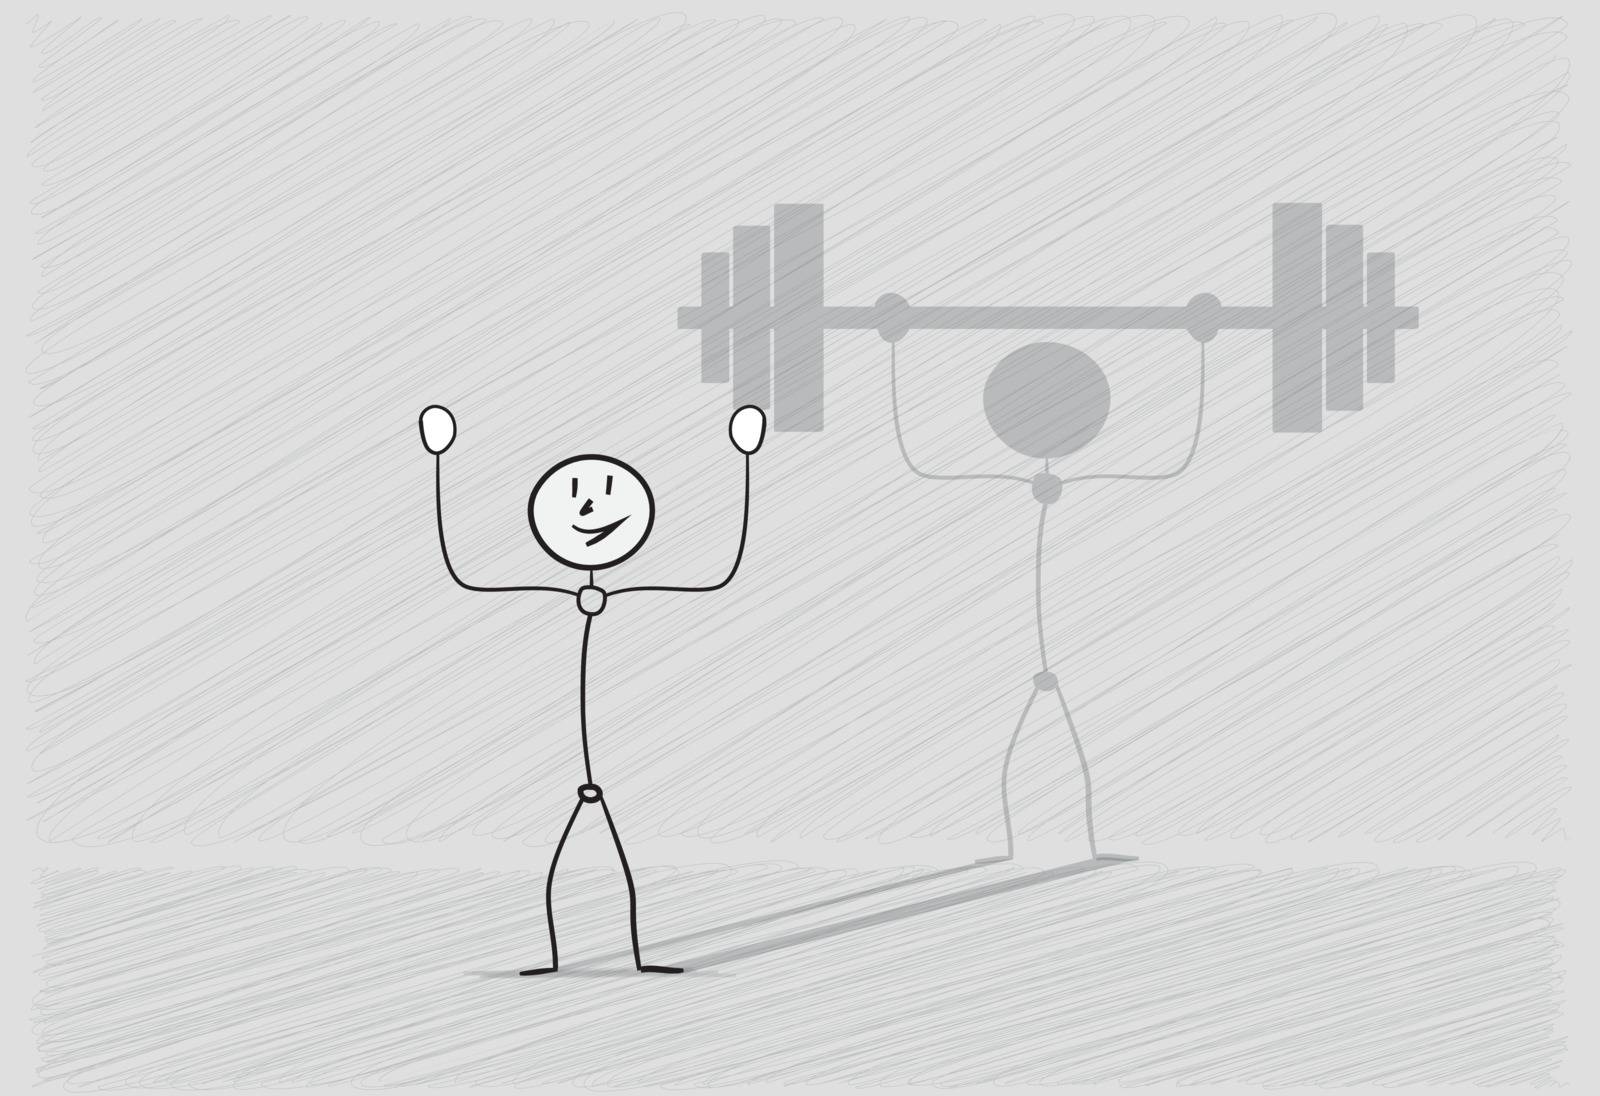 one weak happy man and shadow with large heavy dumbbell as an illusion, crosshatched image